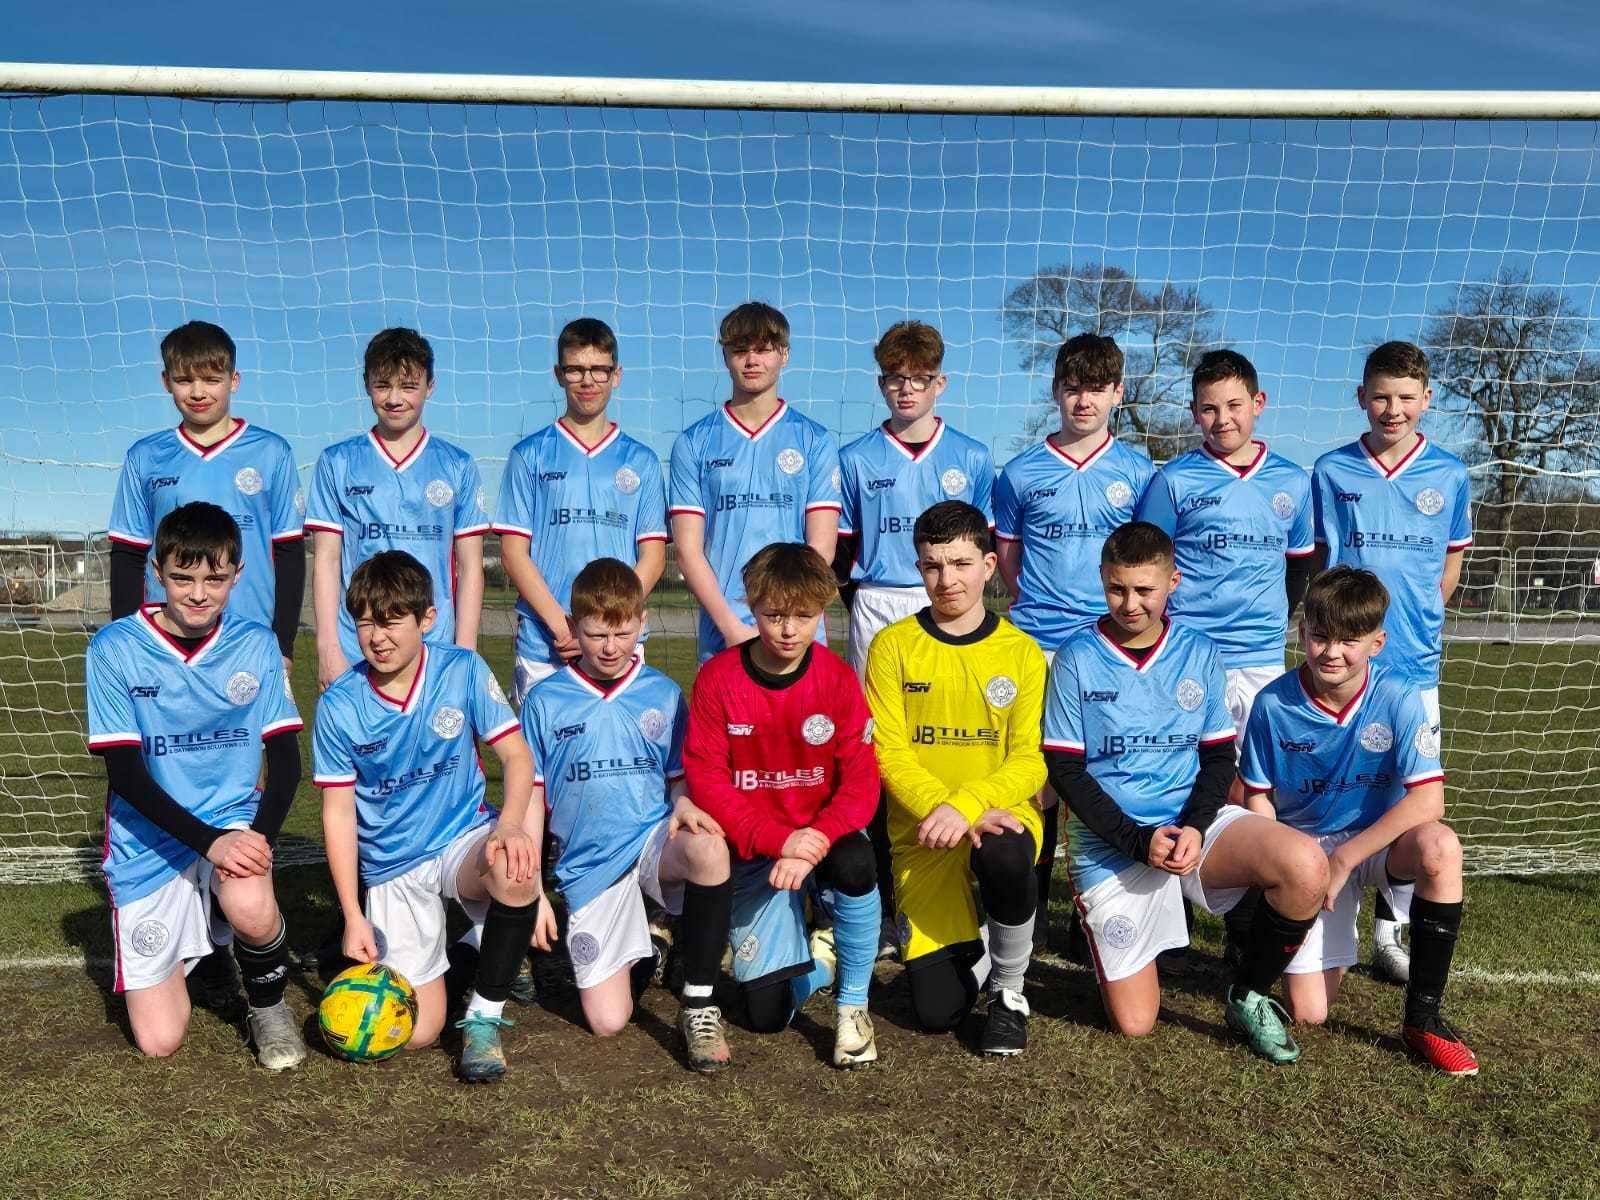 Caithness United under-14s were 6-2 winners over Balloan City in Inverness.